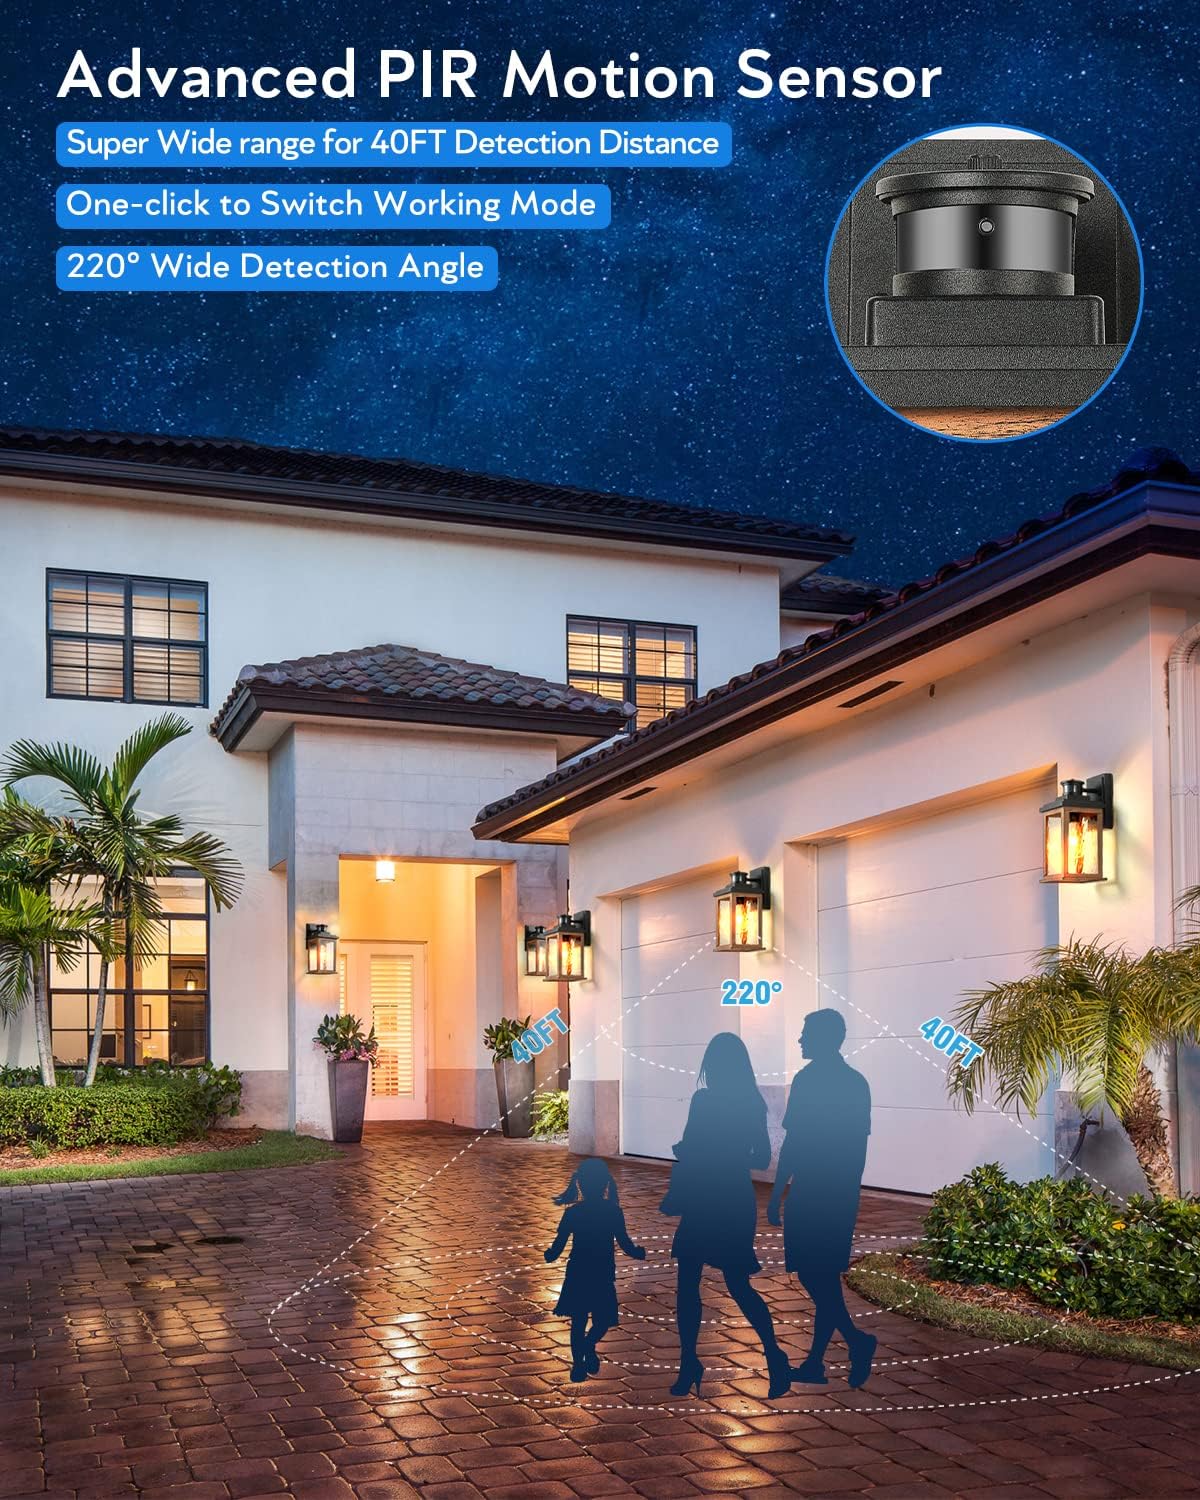 VIANIS Motion Sensor Outdoor Lights, Dusk to Dawn Outdoor Lighting for House, Wood Grain Garage Lights, Lantern Wall Mount, Waterproof Porch Sconce for Entryway, with Anti-Rust, Weather Resistant